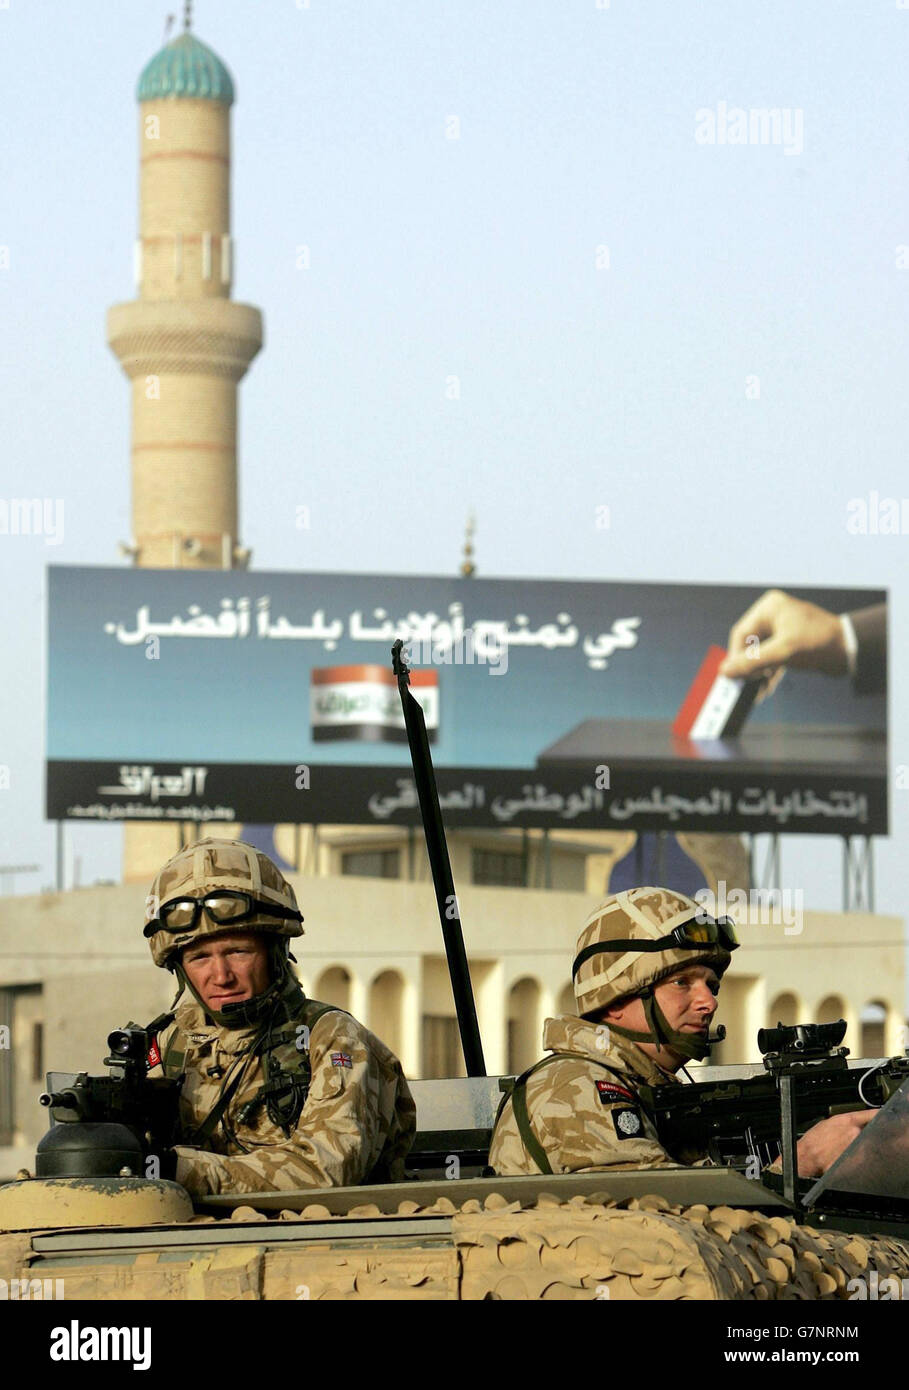 British soldiers based at the headquarters of 4th Armoured Brigade patrol in central Basra against a backdrop of posters promoting the forthcoming elections. Stock Photo